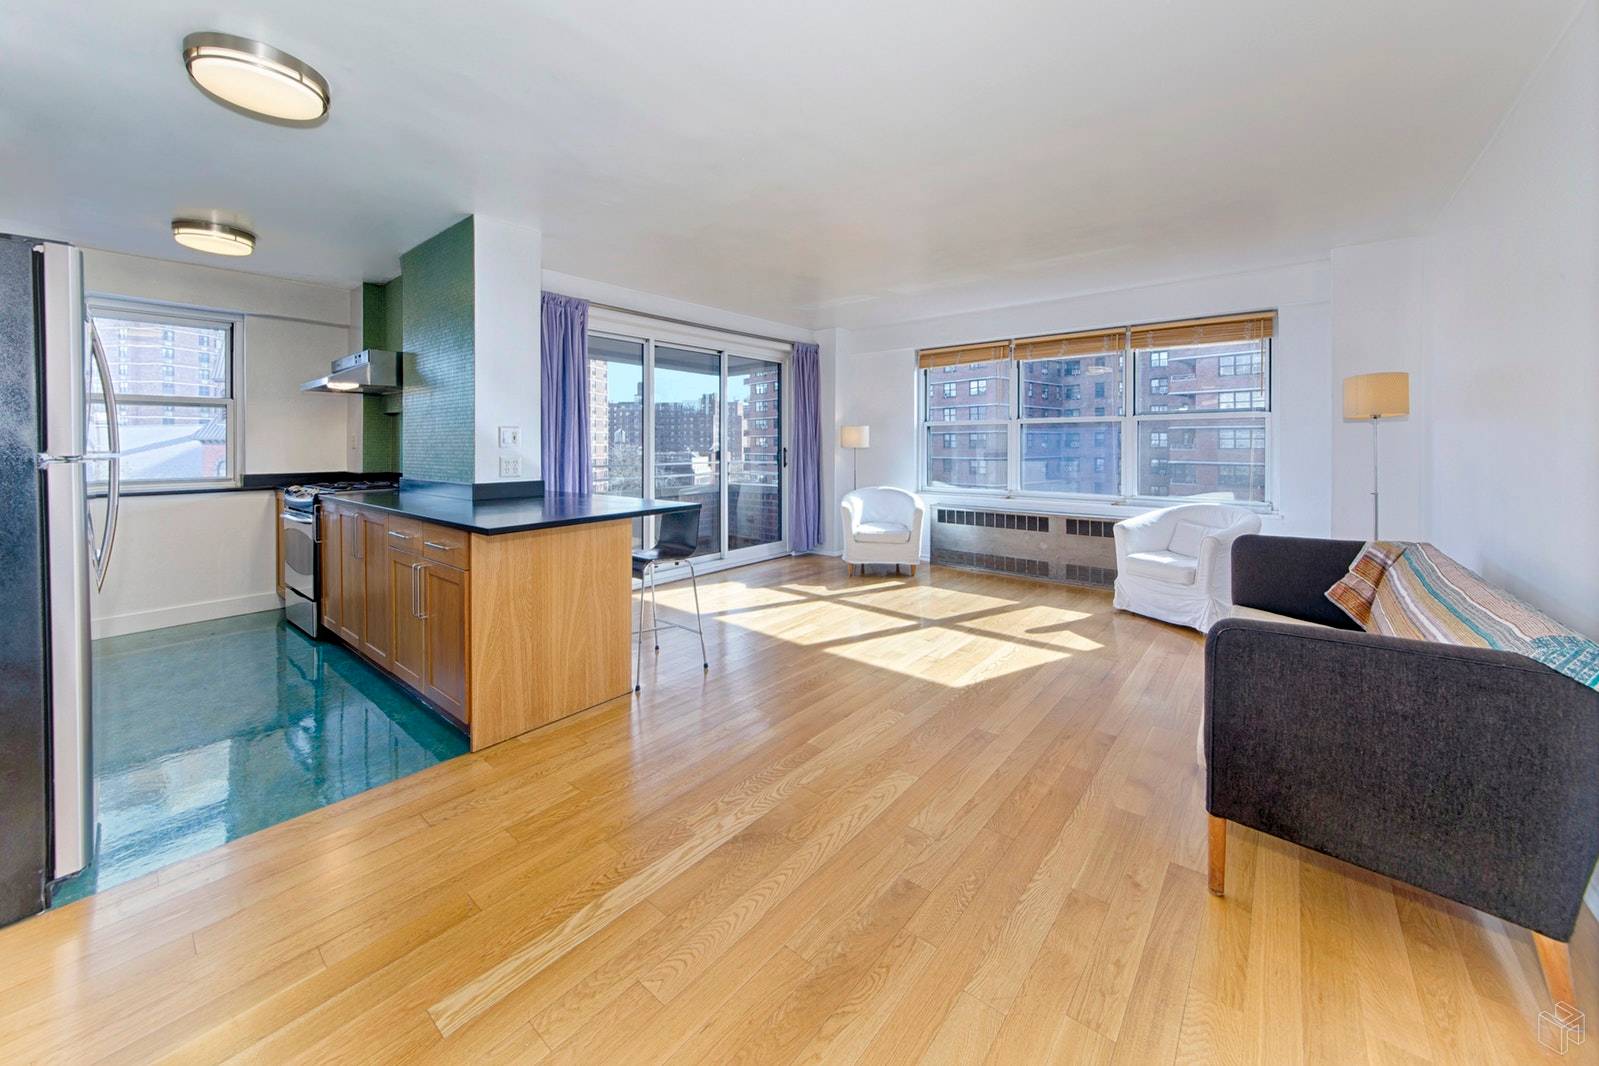 This fully renovated outside corner unit offers excellent light and views with no interior facing windows.